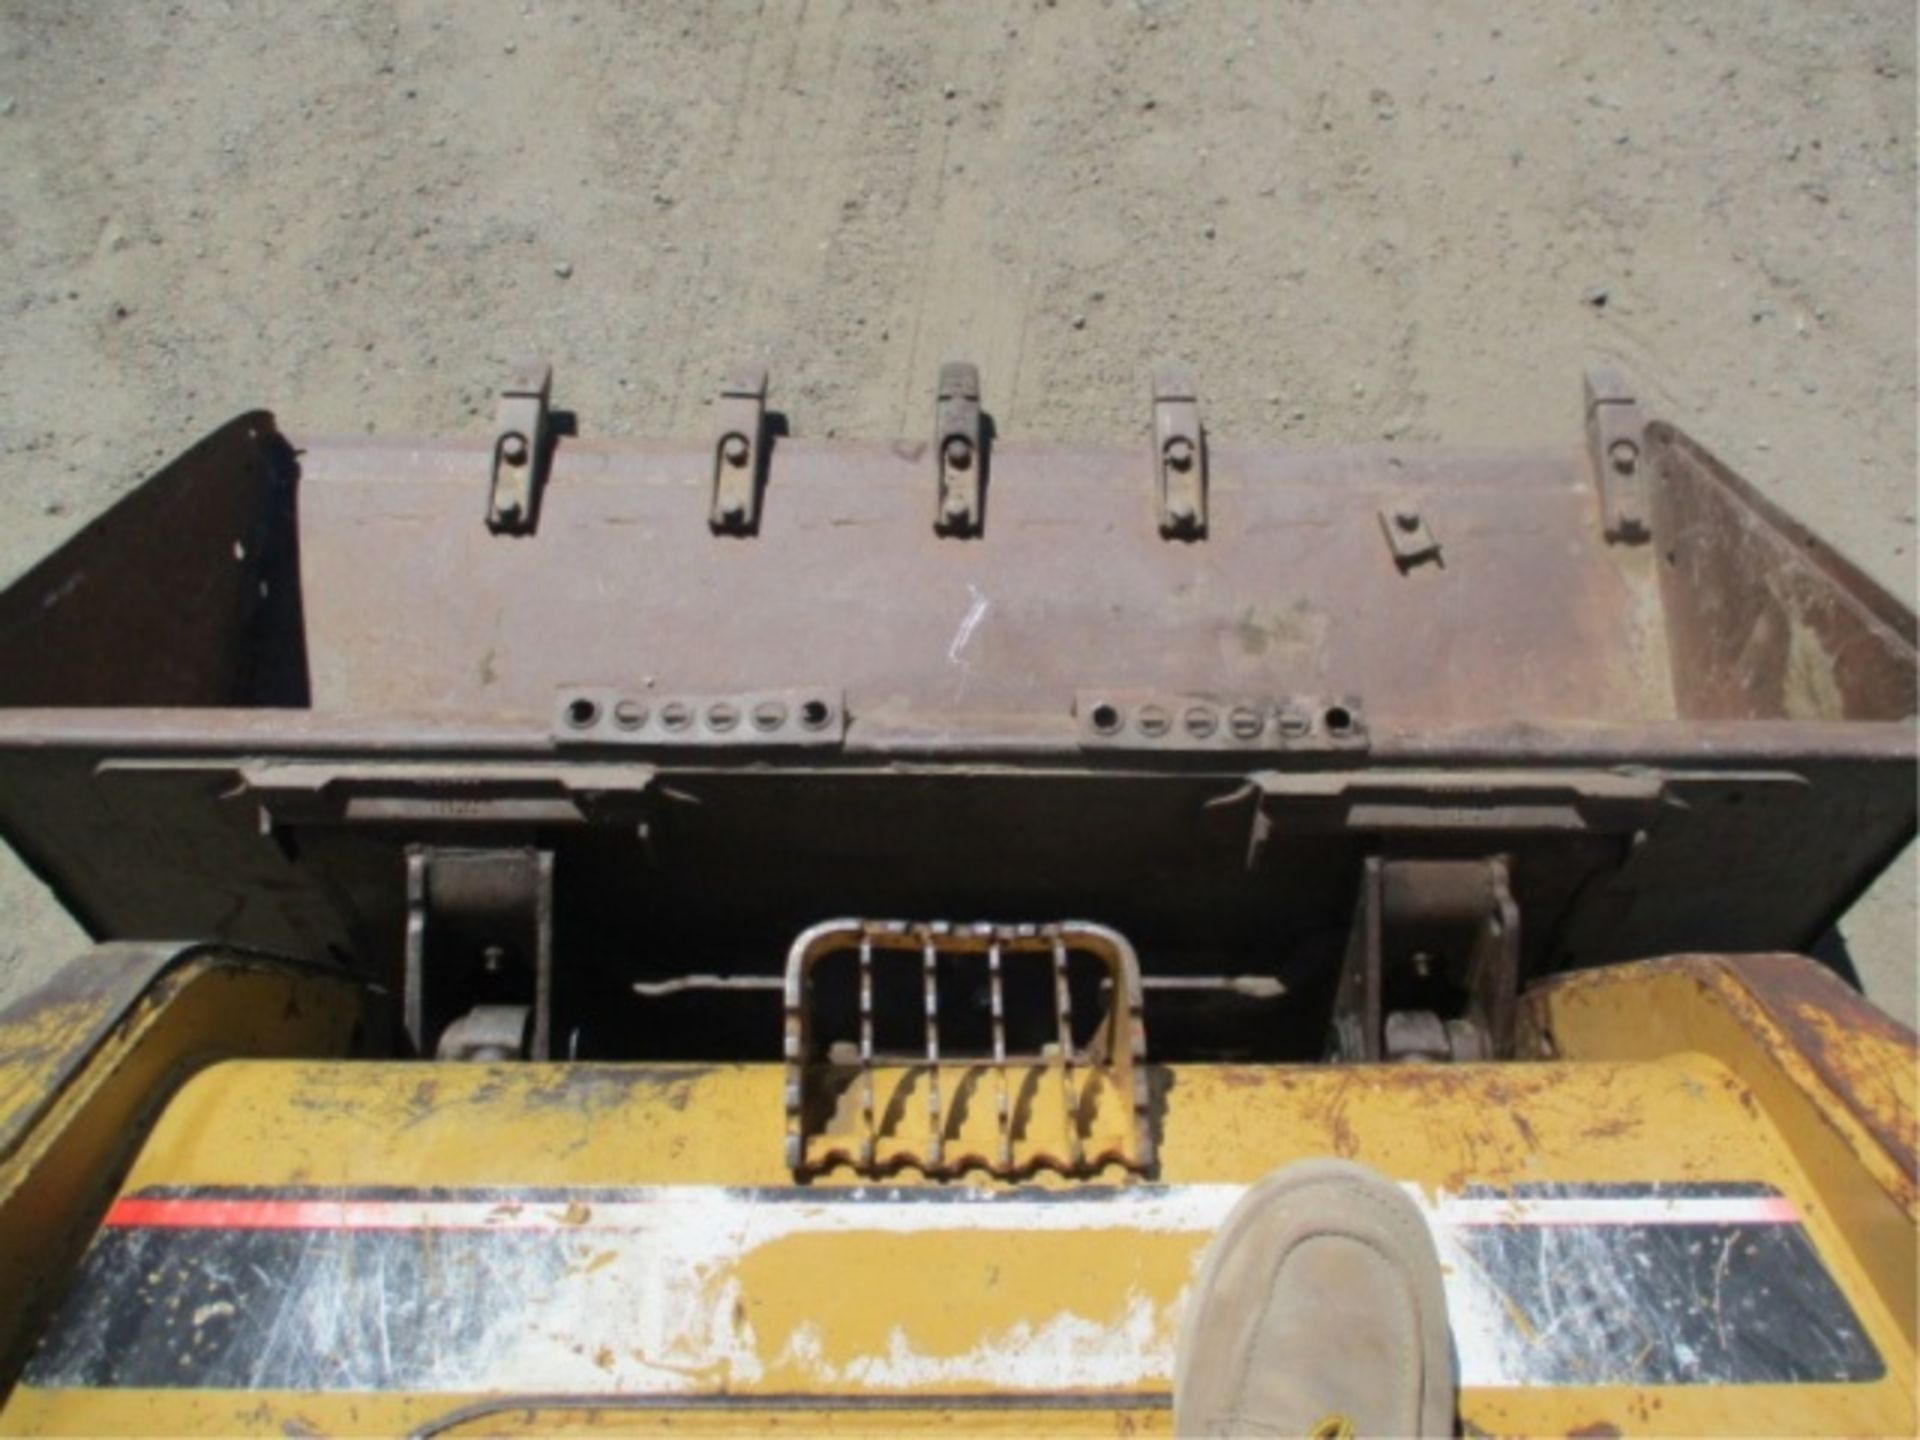 2005 Caterpillar 262B Skid Steer Loader, 4-Cyl Diesel,Tooth Bucket, Auxiliary Hydraulics, Cushion - Image 35 of 45